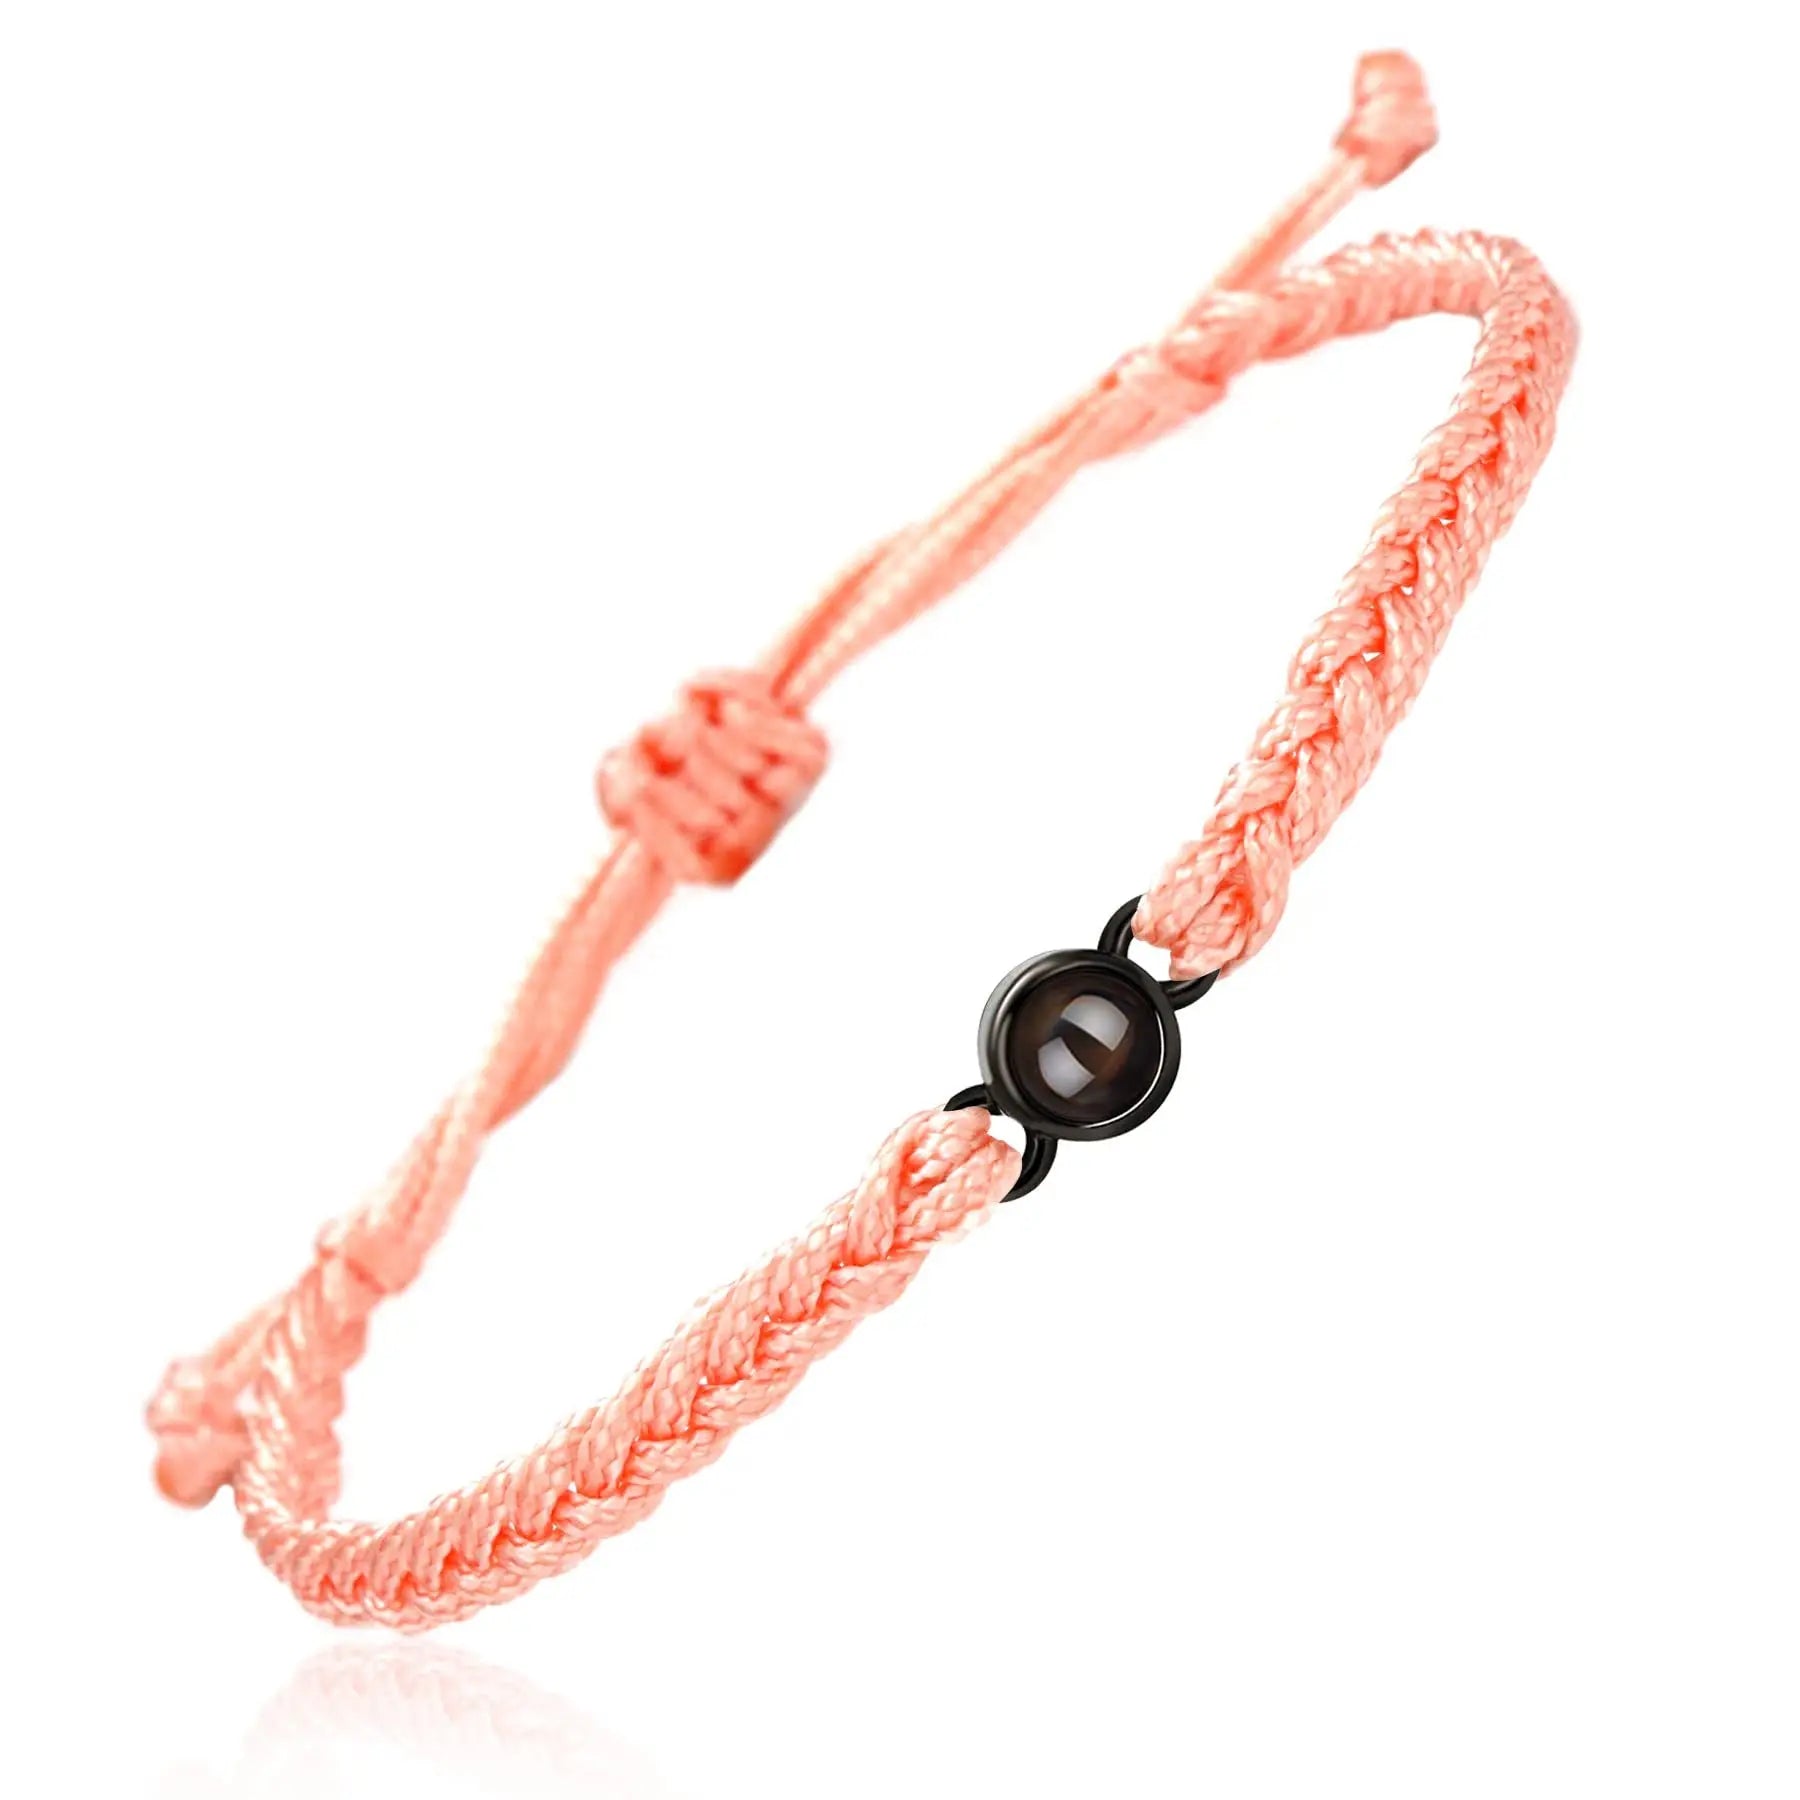 Projection Jewelry Classic Hand-Woven Ropes Custom Bracelets With Personalized Photos Suitable For Holiday Commemorative Gifts Pink and black - IHavePaws